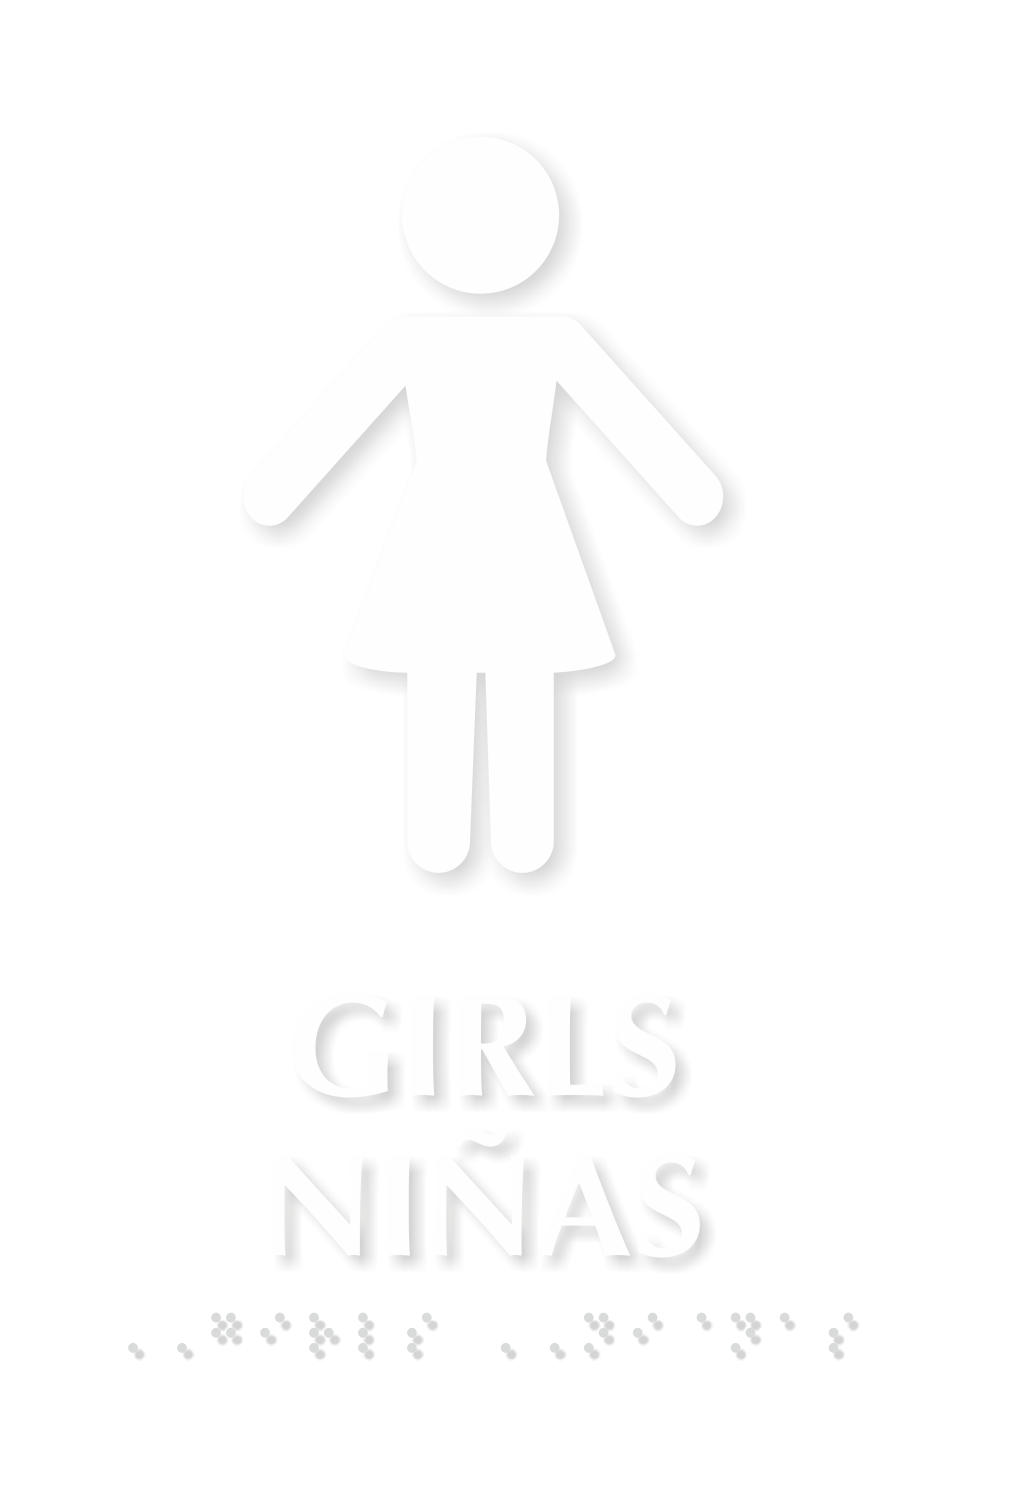 Girls Ninas Bilingual TactileTouch Braille Restroom Sign